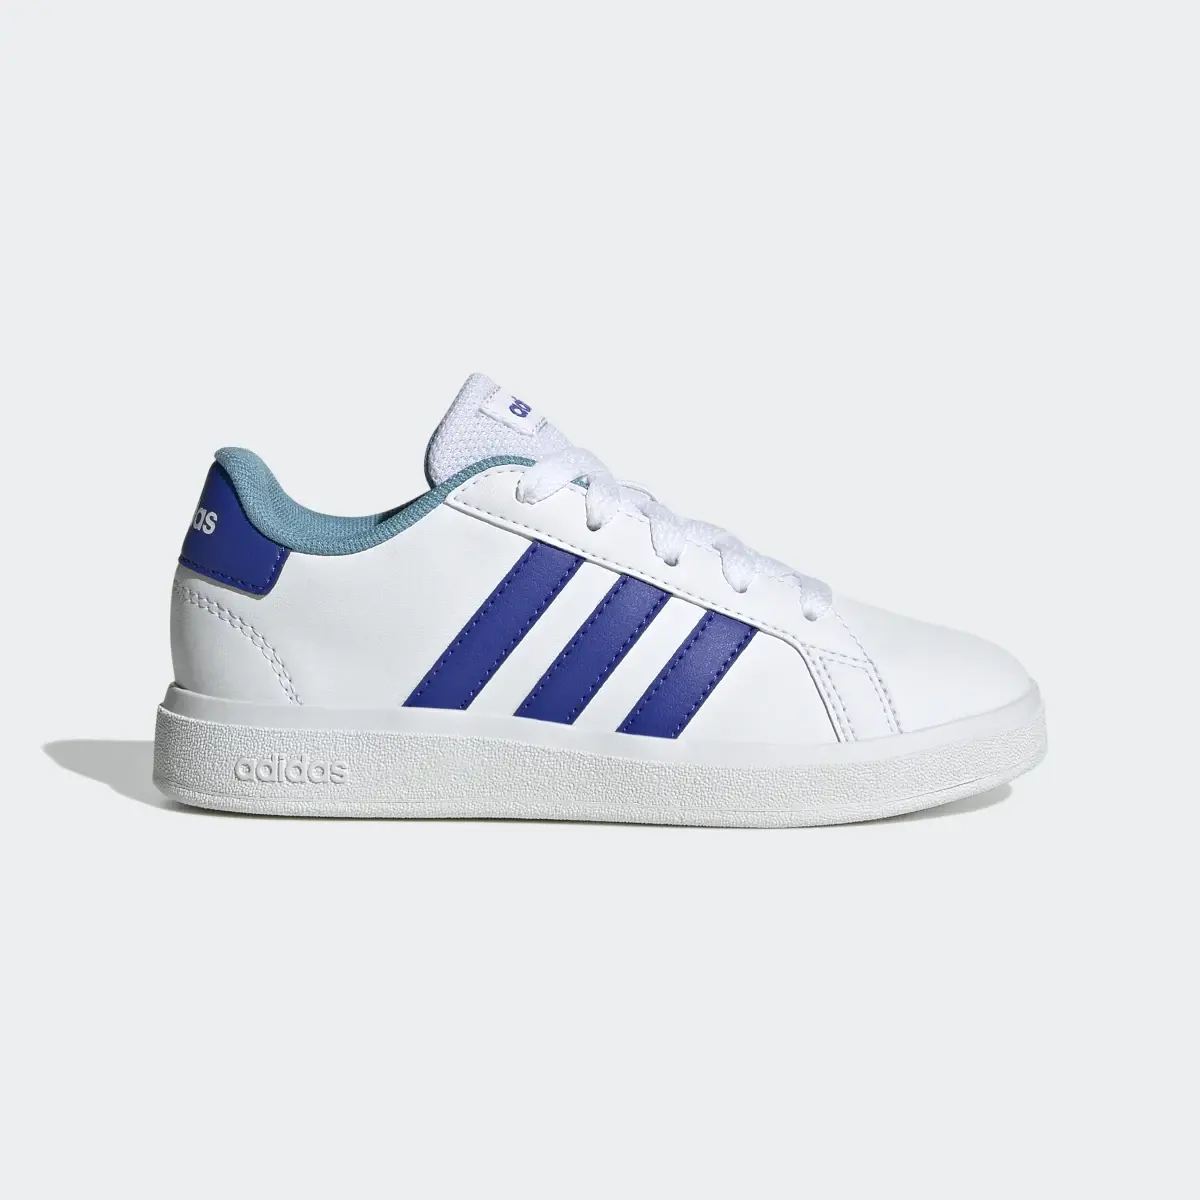 Adidas Grand Court Lifestyle Tennis Lace-Up Schuh. 2